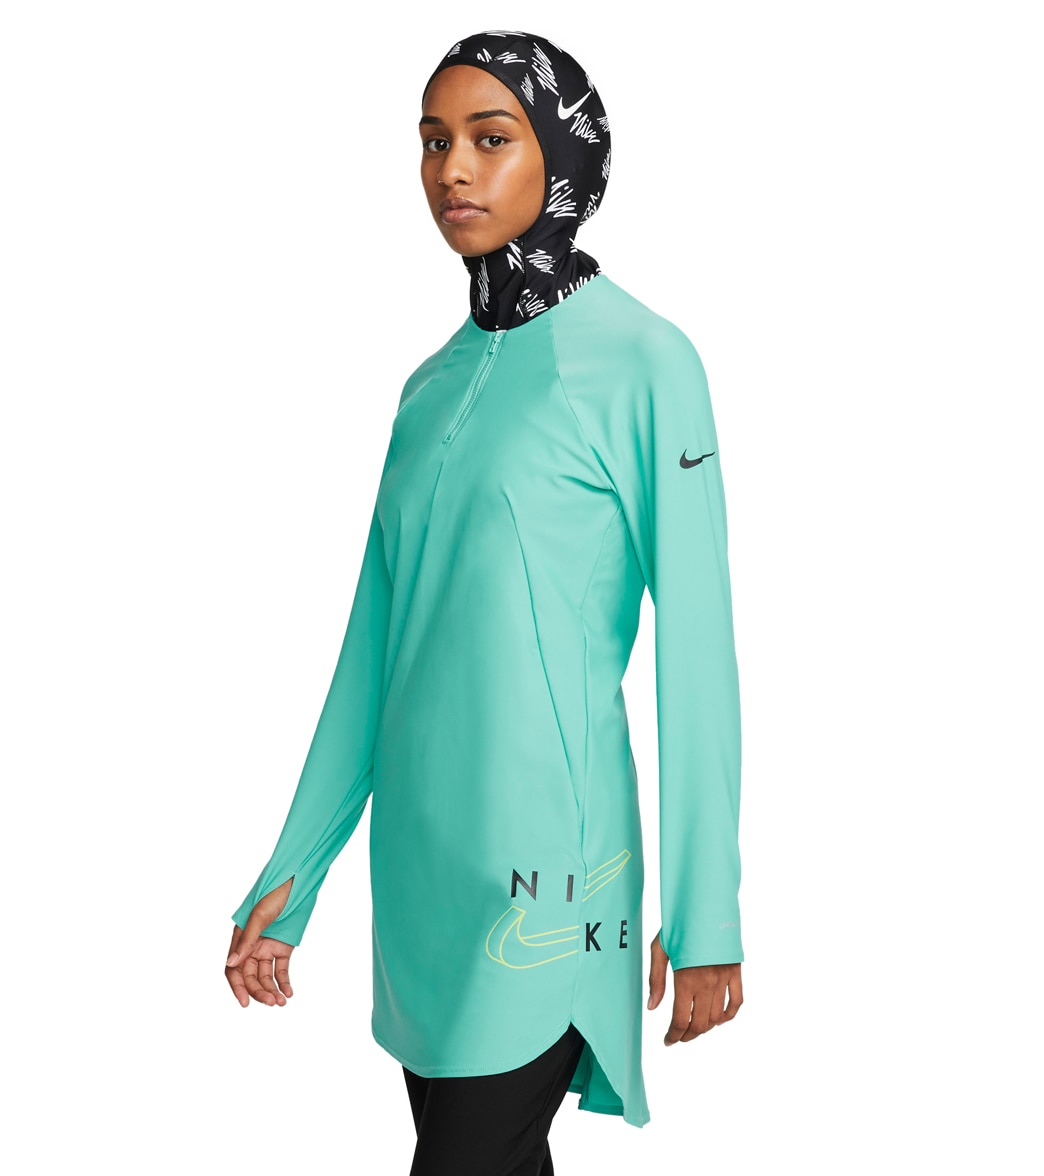 Nike Women's Victory Logo Full Coverage Swim Tunic - Washed Teal Small - Swimoutlet.com